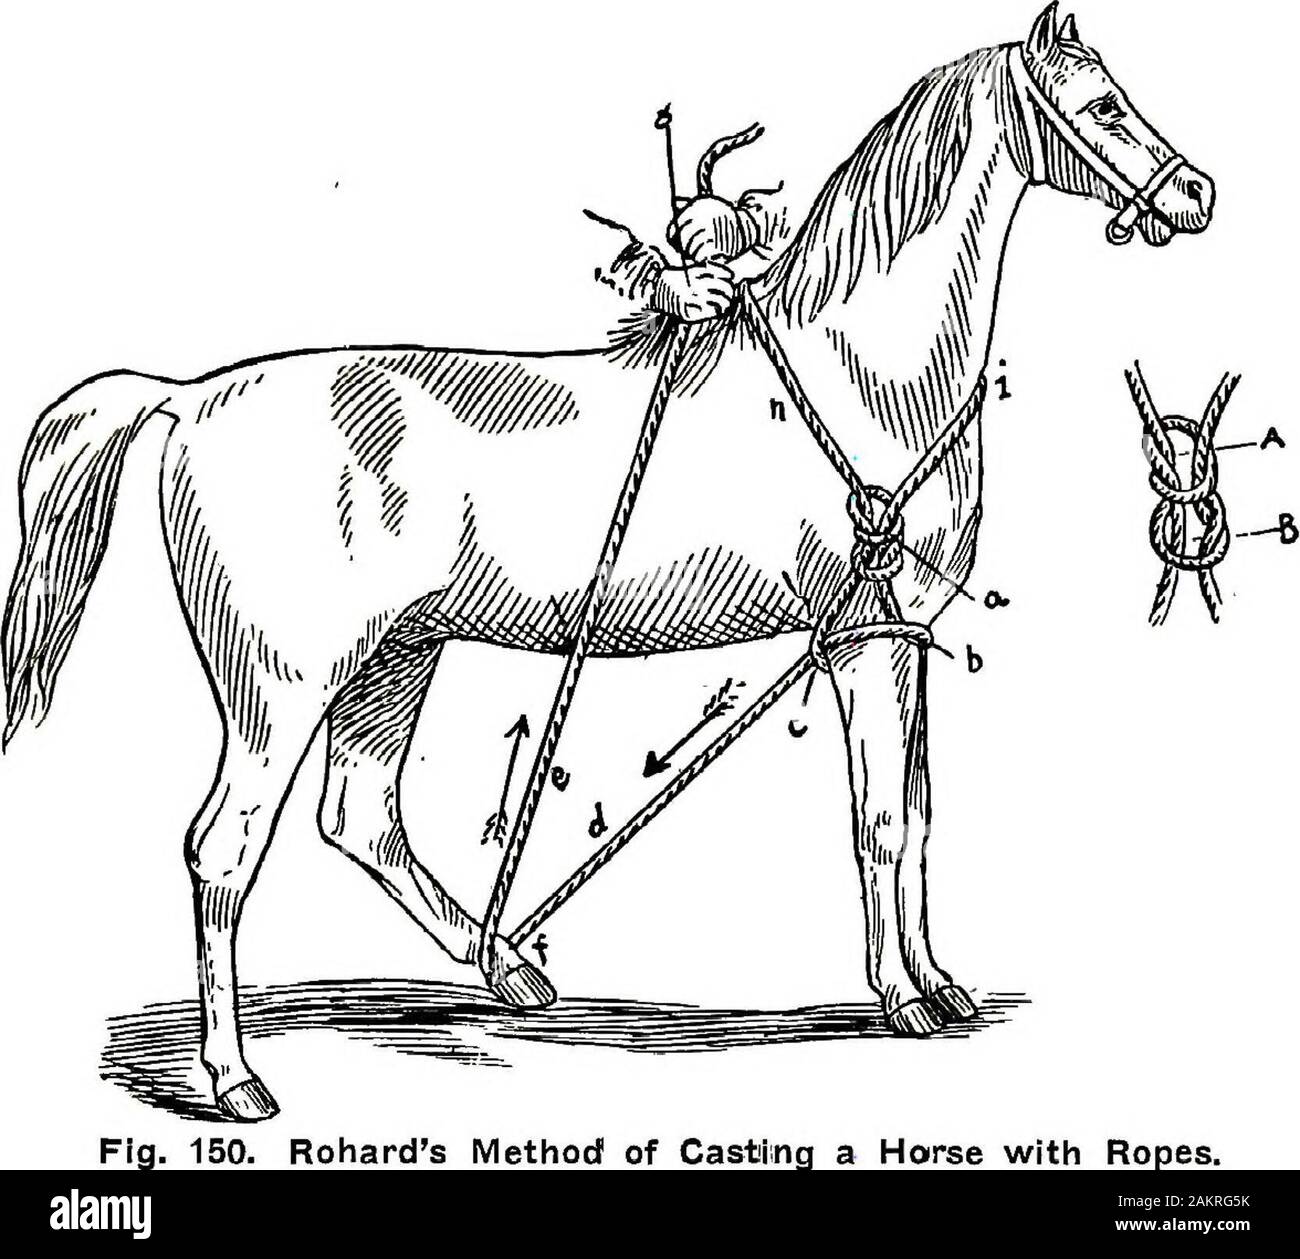 Restraint of domestic animals; a book for the use of students and practitioners; 312 illustrations from pen drawings and 26 half tones from original photographs . Harness as IVIodified byAbllgaard. Bohards Method of Casting amd Restraining a Horse With Ropes. The rope method of Rohard, Eigure 150, is simple in itsconstruction and convenient in its application. It is intendedto be used in casting and restraining wild, nervous or viciousanimals on occasions where sufficient help for other methodsis unavailable. A rope 25 feet long, futnished with a loop inend, is all that is necessary in making Stock Photo